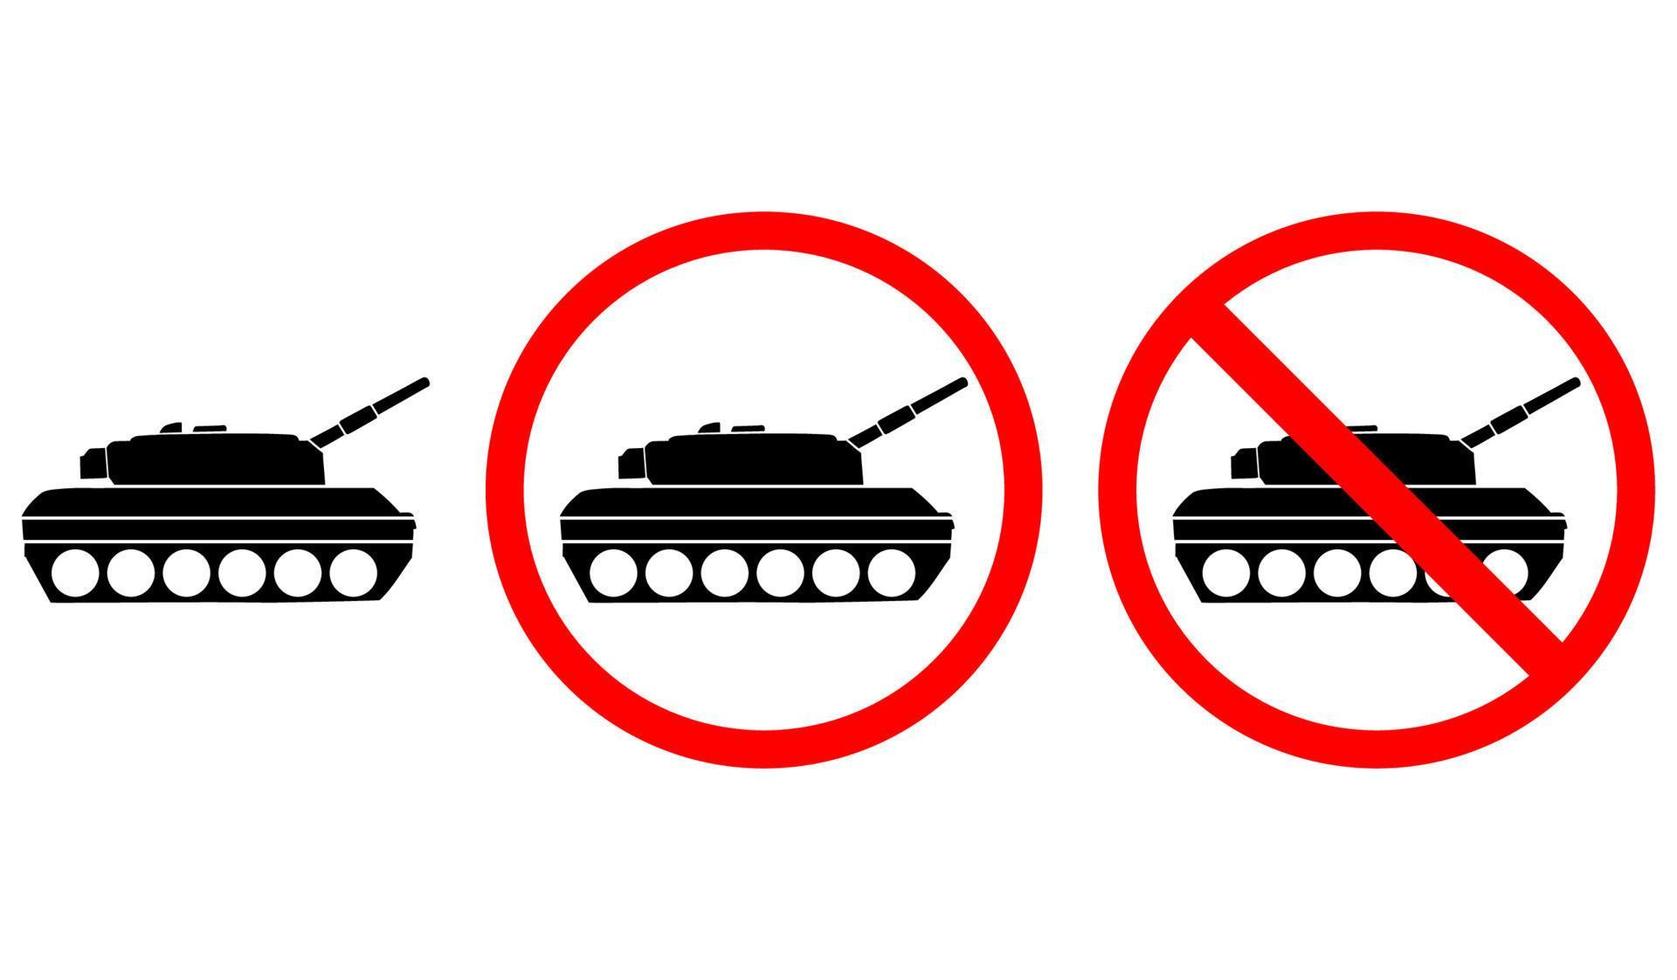 Stop the WAR. Crossed out tank. Set of anti-war signs. Vector illustration isolated on green background.